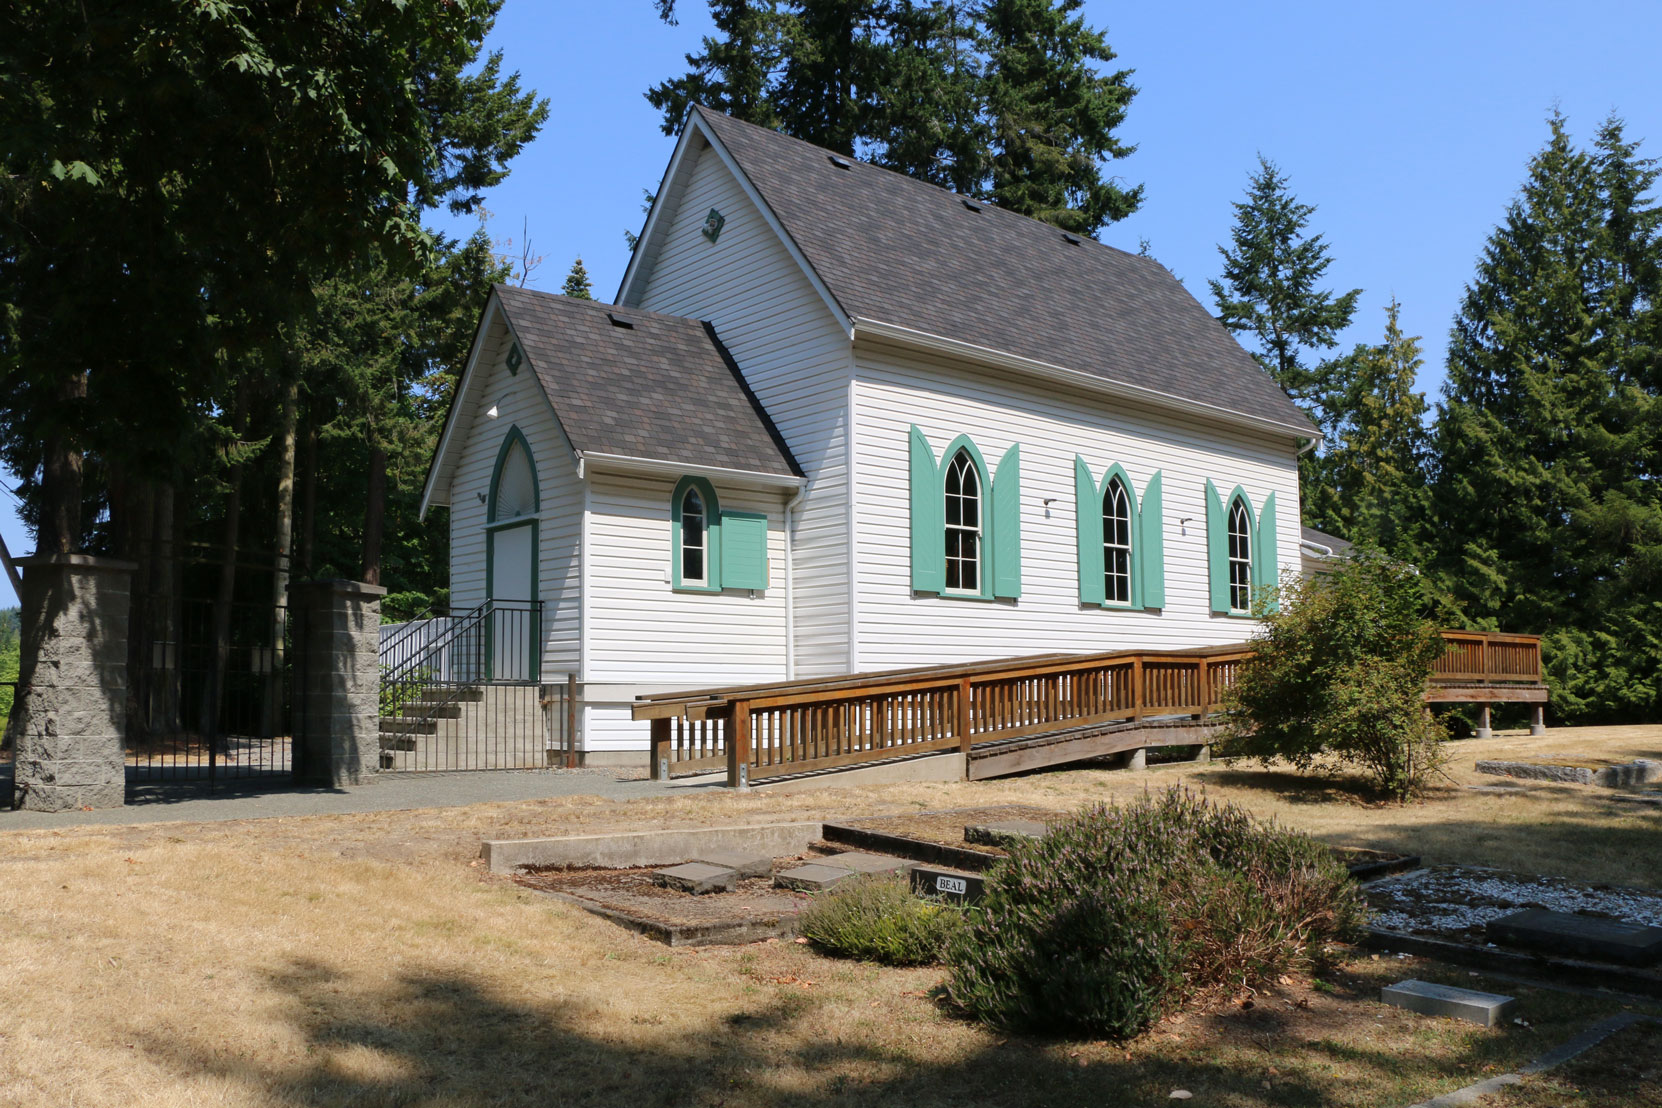 Mill Bay United Church and Cemetery, 2851 Church Way, Mill Bay, BC (photo by Temple Lodge No. 33 Historian)